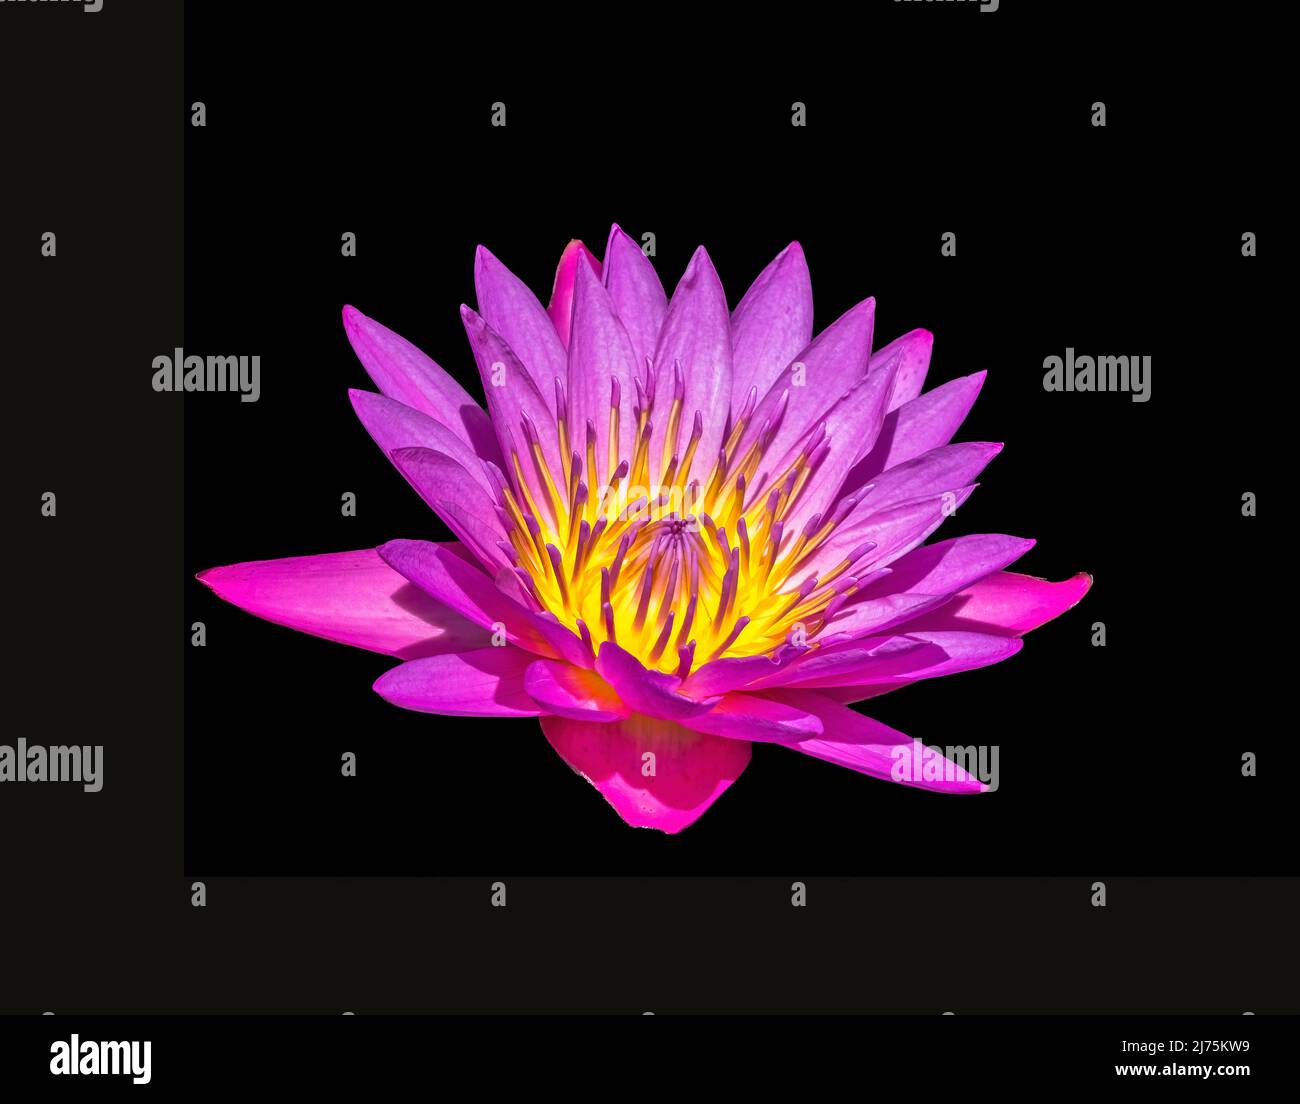 Bright colorful Water Lilies in a pond Stock Photo